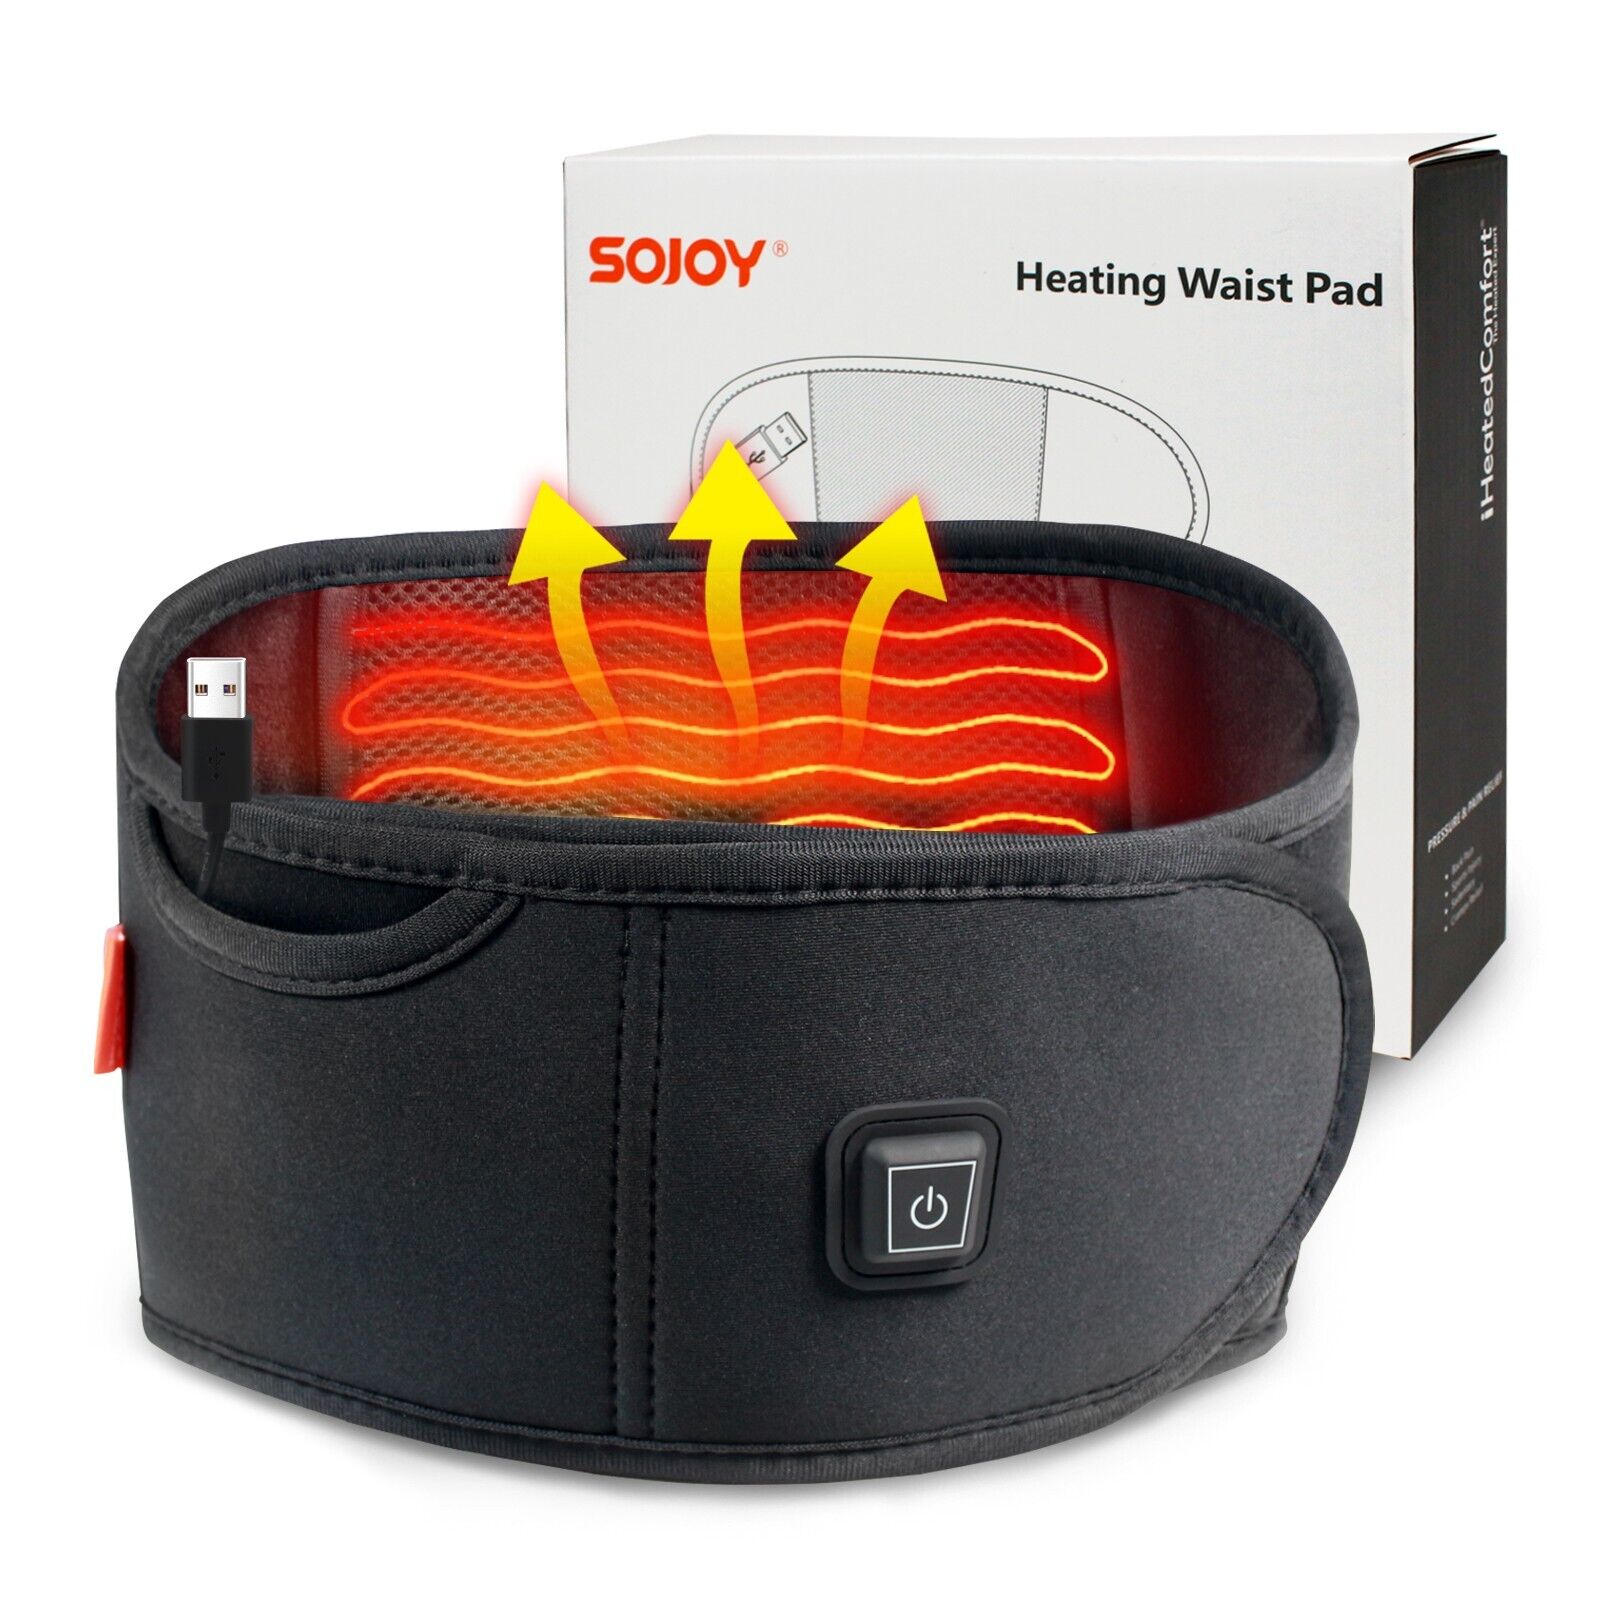 Sojoy USB Heating Waist Pad for Back Pain Relief 3 Heating Levels Portable Belt